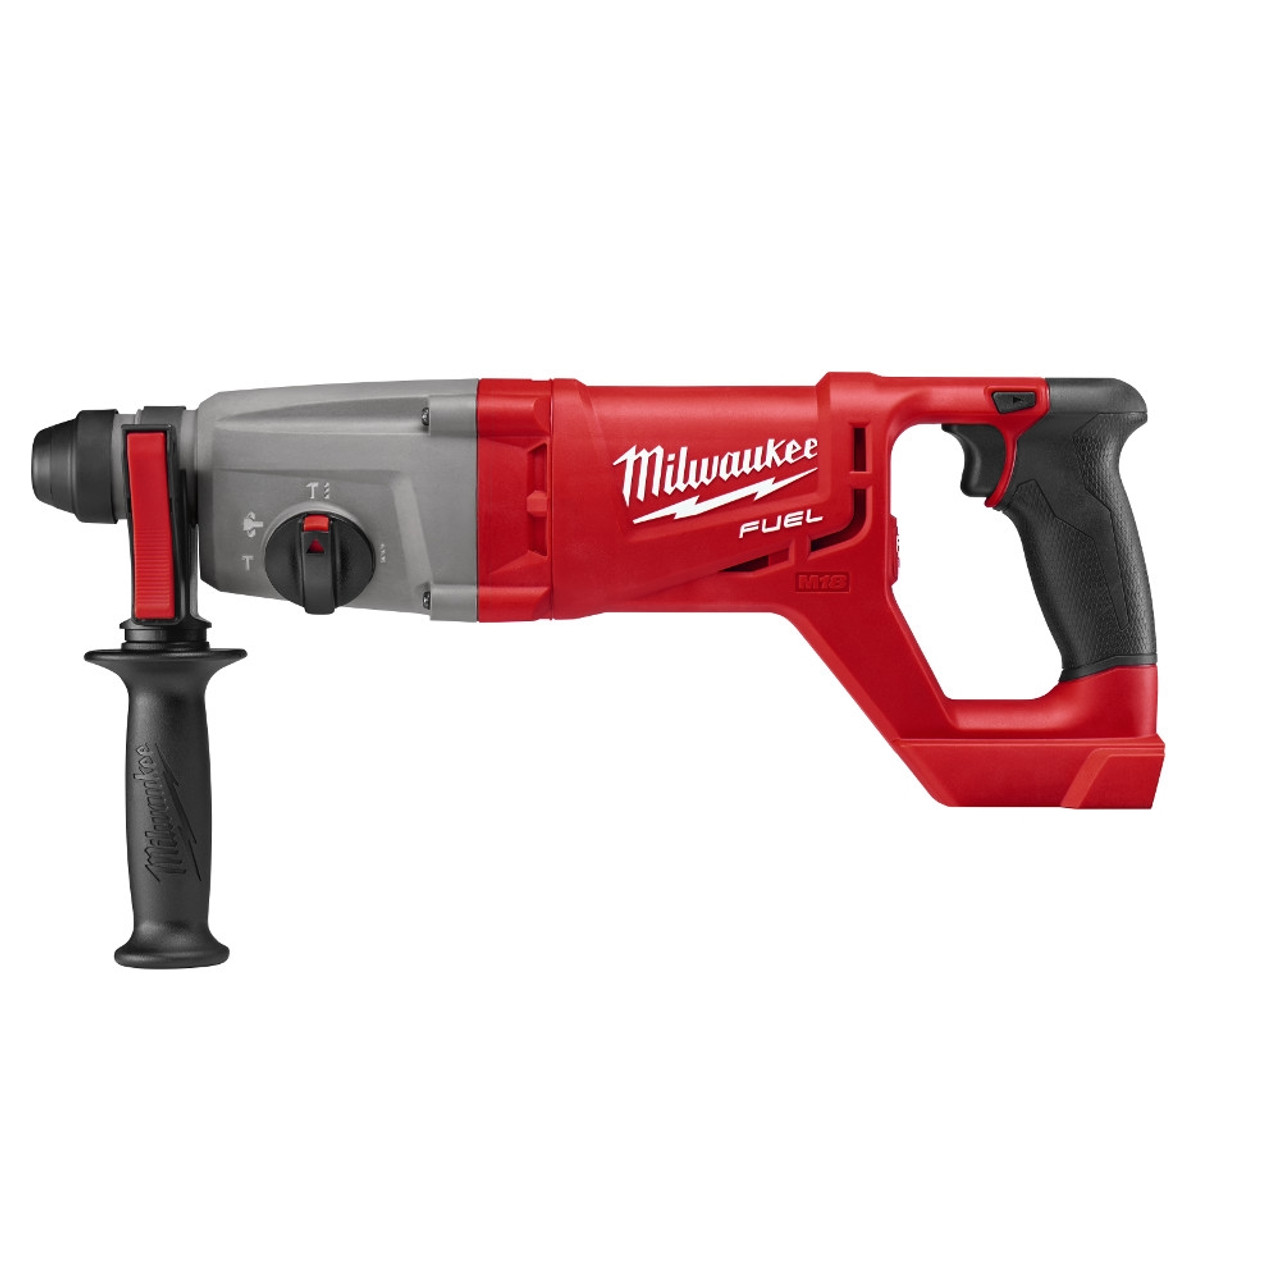 Milwaukee 2713-20 M18 FUEL 1 in. SDS Plus D-Handle Rotary Hammer